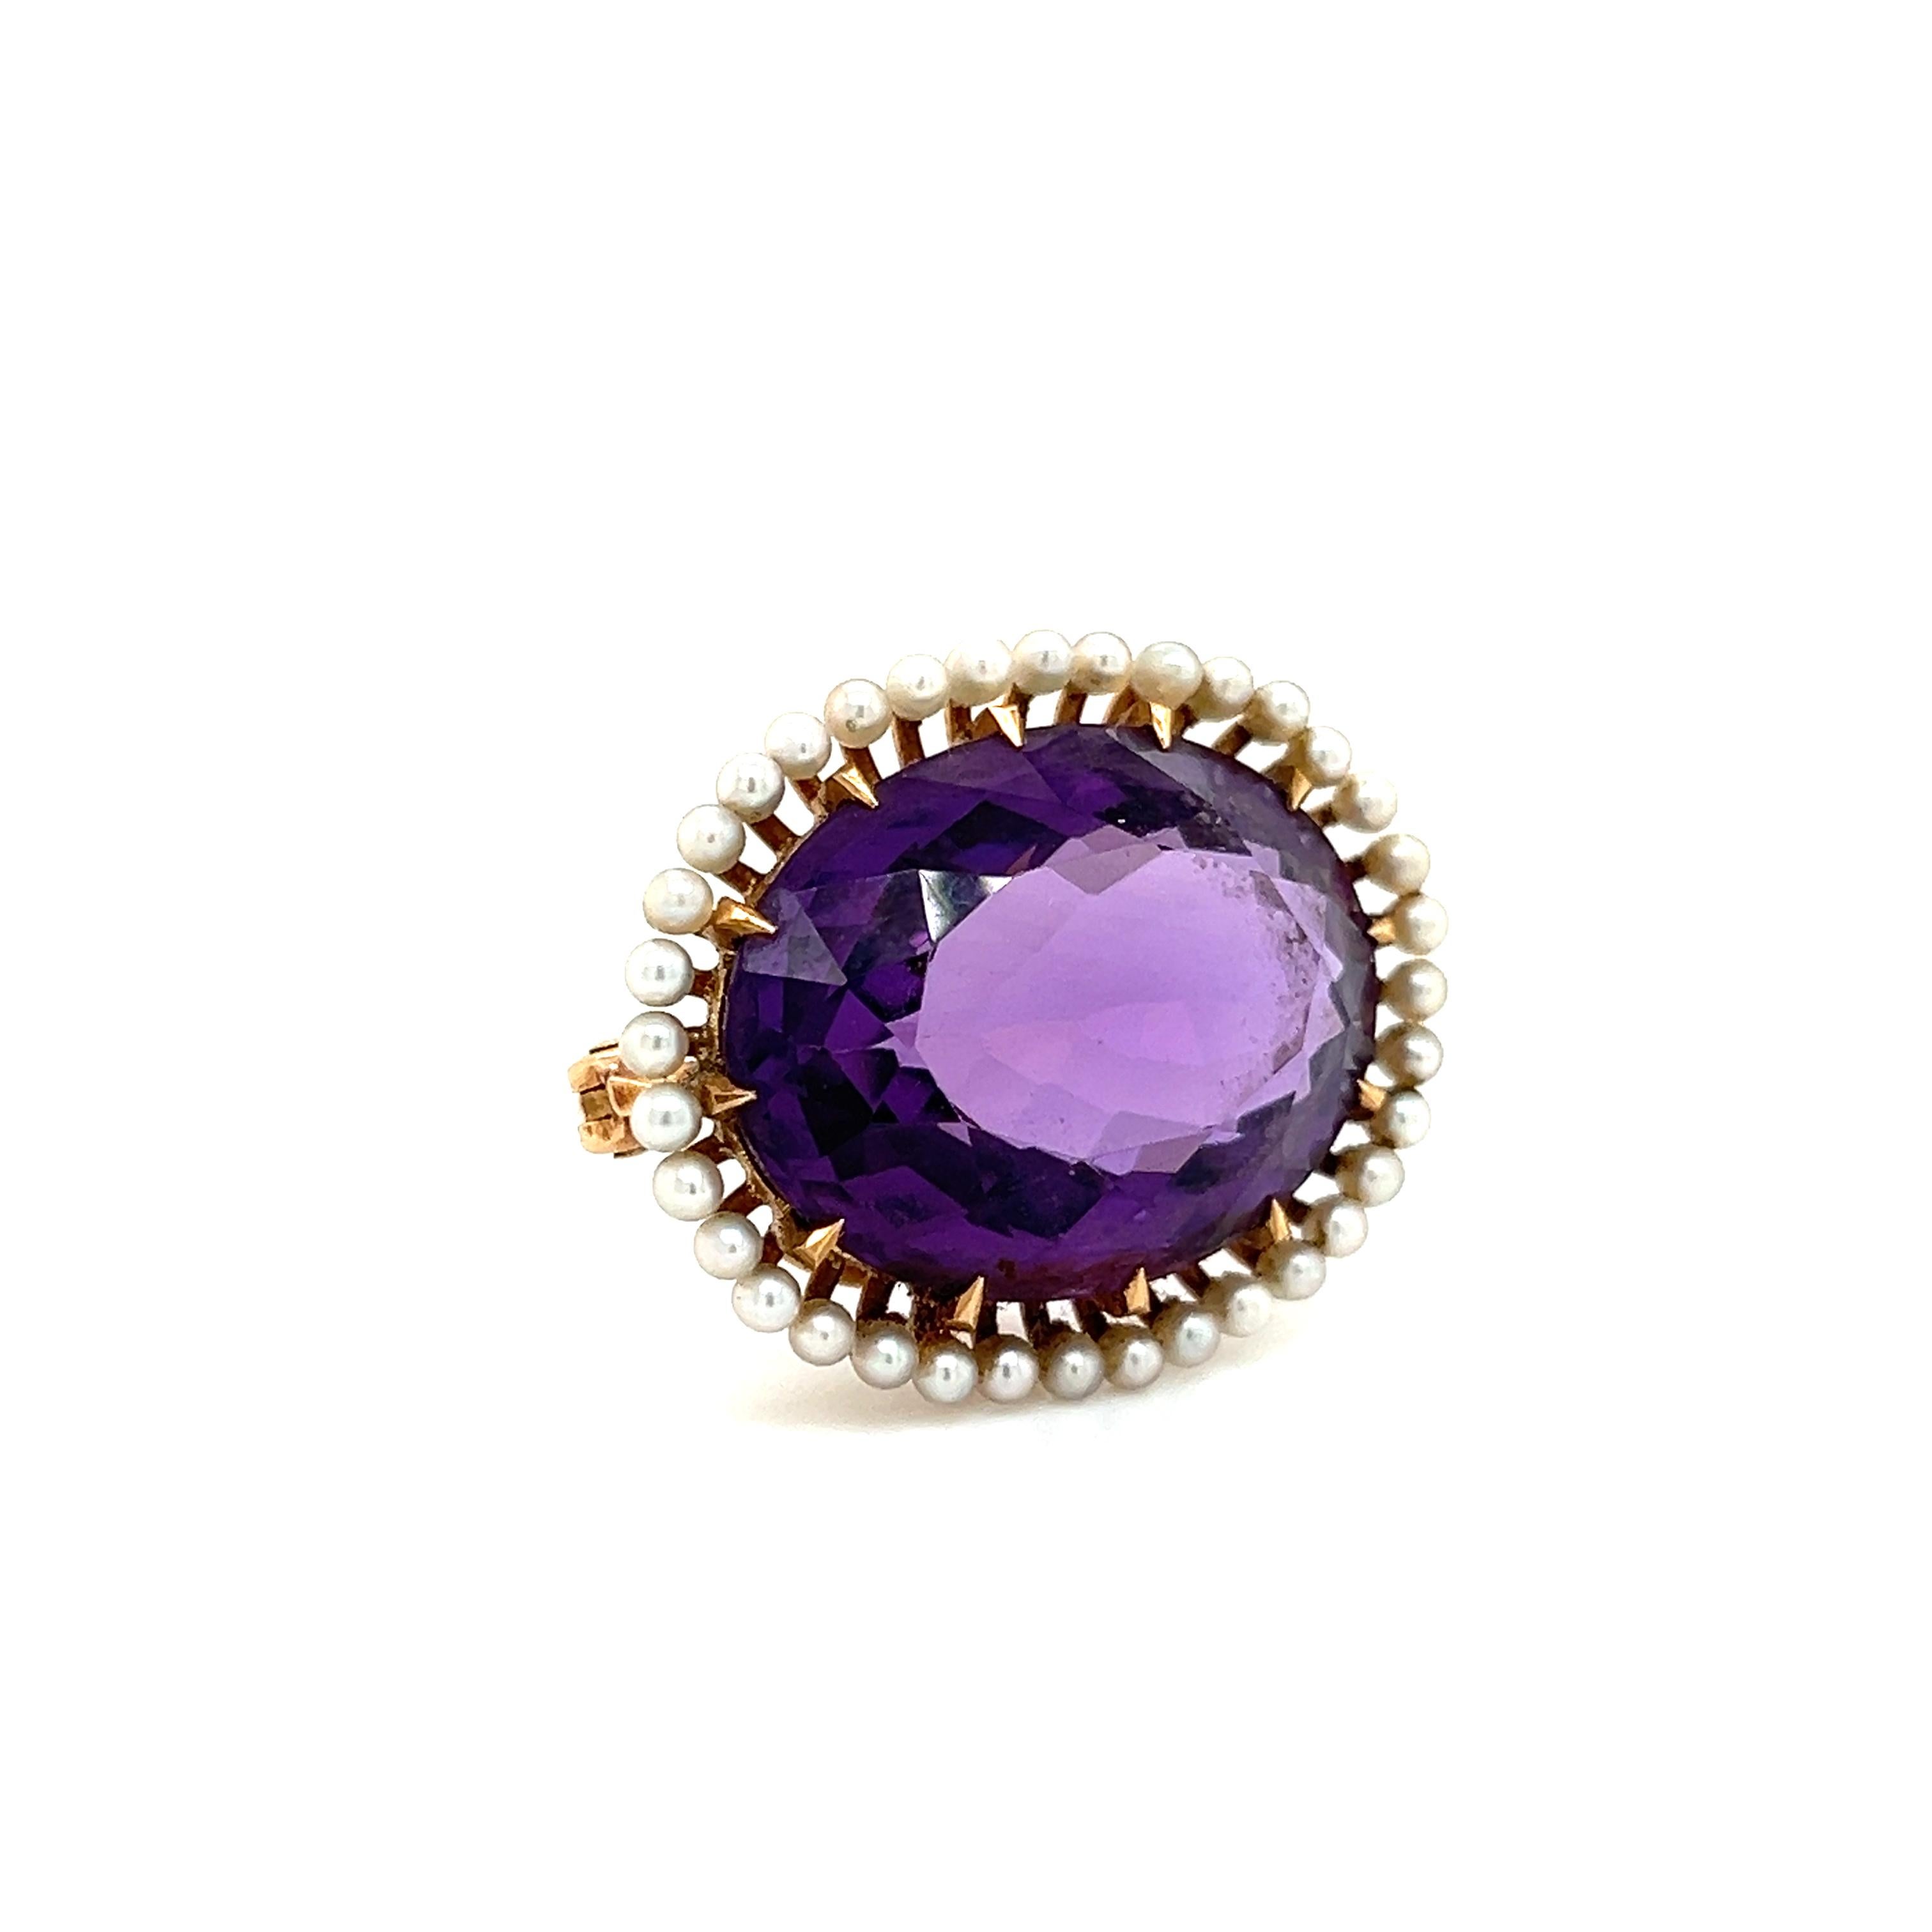 Beautiful pendant brooch crafted in 14k yellow gold. This elegant item highlights one oval shaped Amethyst gemstone set east/west. The gemstone is secured with razor sharp eagle talon prongs and accented with a natural seed pearl gemstone halo. The